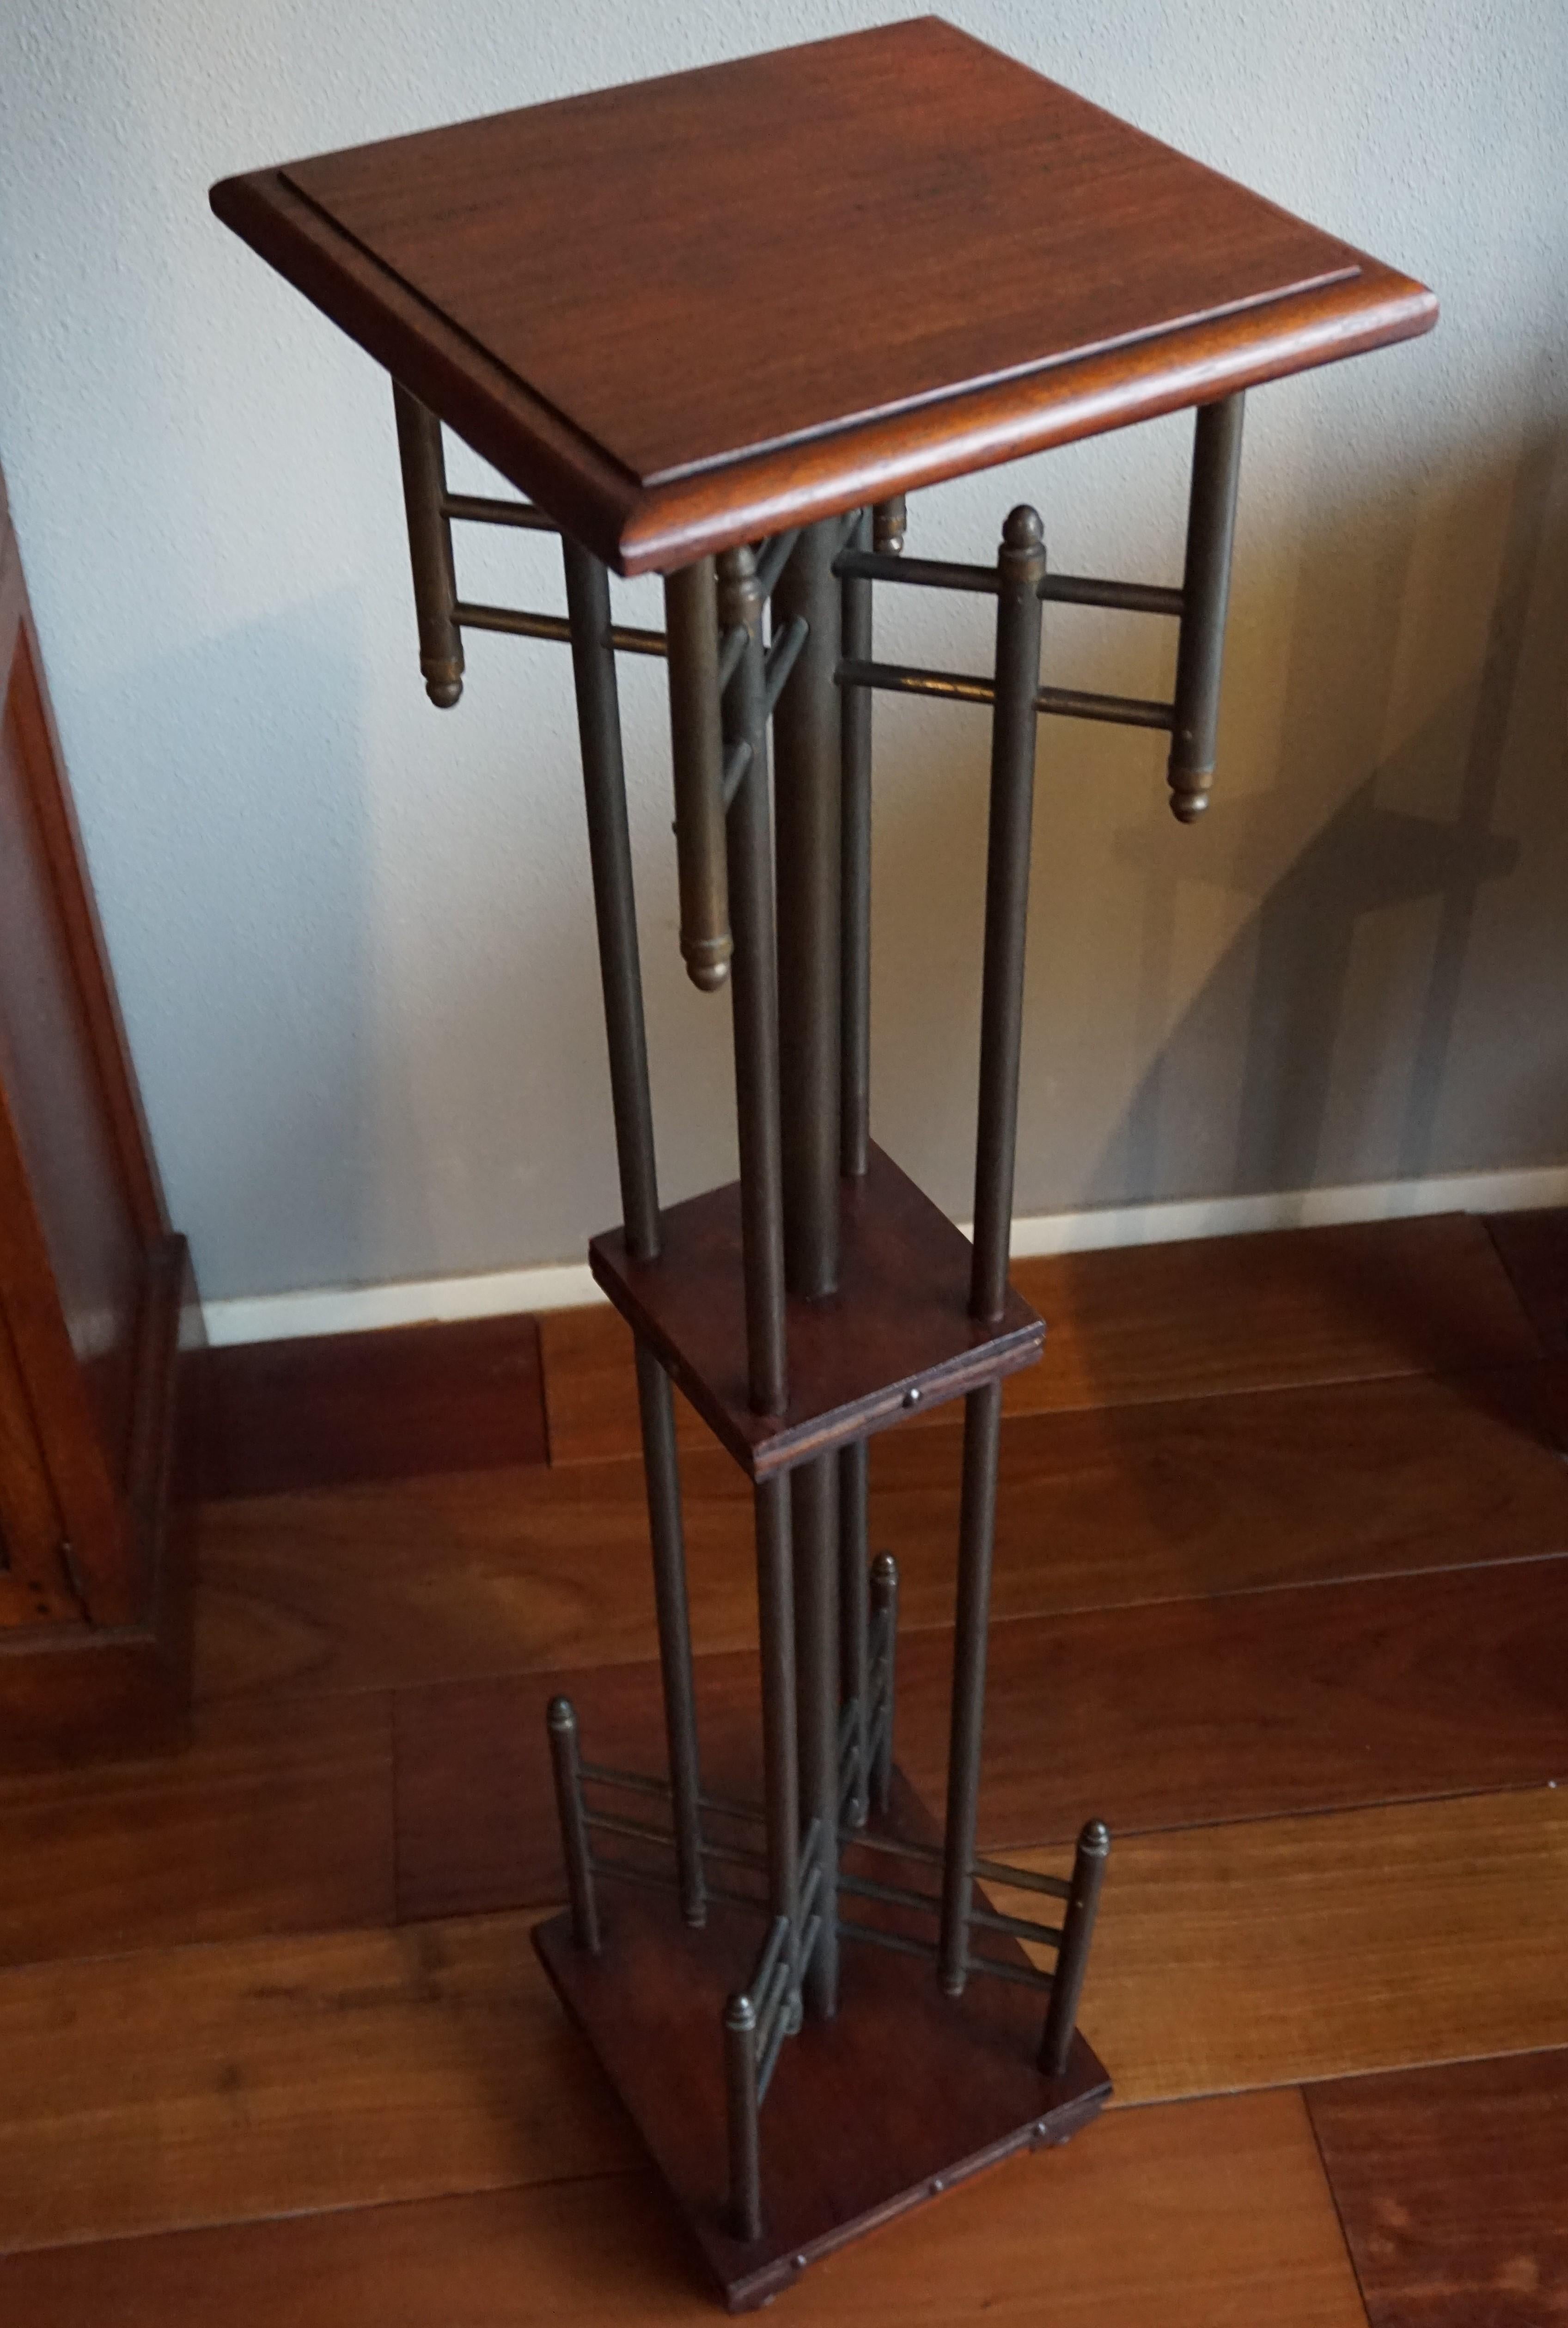 Stylish and great workmanship antique pedestal.

This unique, modernist pedestal is another one of our recent great finds. All handcrafted in the late 1800s or early 1900s this open (or see-through) design has a modernist architectural look and feel